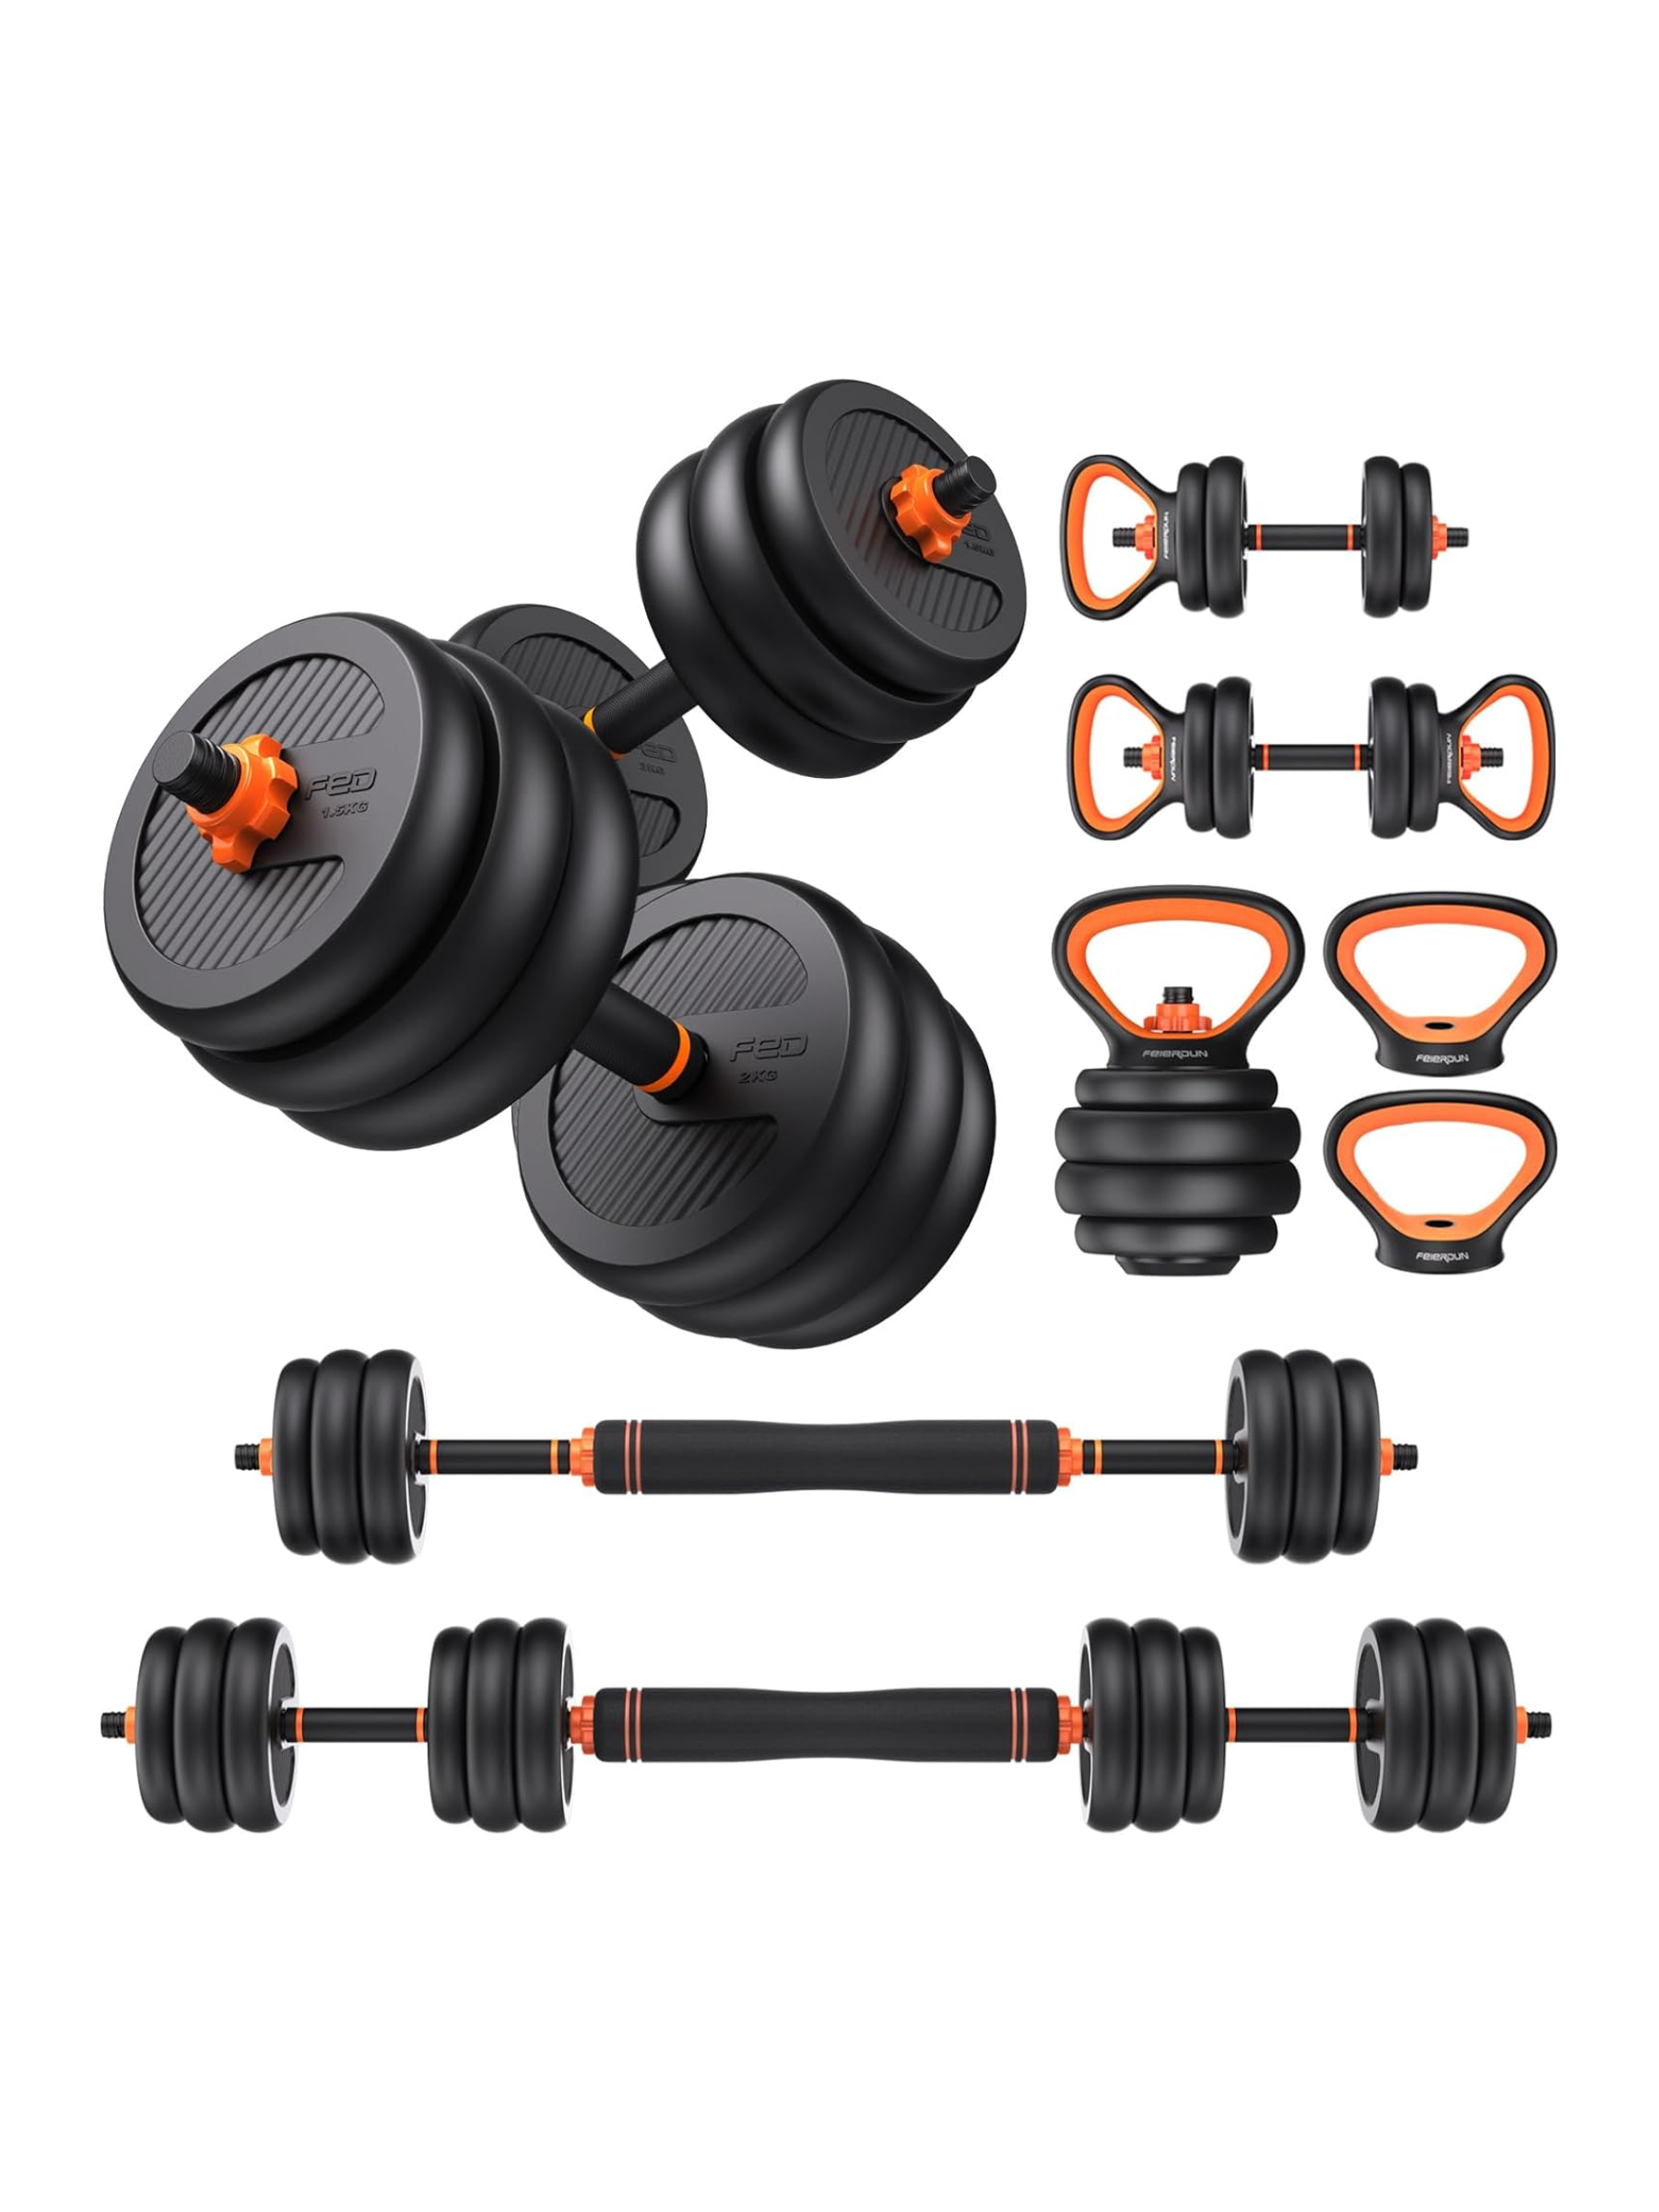 Young athletes or teens going for gains can get their workouts in at home with adjustable dumbbells that adjust up to 90 pounds and convert between a barbell, kettlebell, and pushup bar. $150, Amazon. <a href="https://www.amazon.com/dp/B09FYTG37V?">Get it now!</a><p>Sign up for today’s biggest stories, from pop culture to politics.</p><a href="https://www.glamour.com/newsletter/news?sourceCode=msnsend">Sign Up</a>